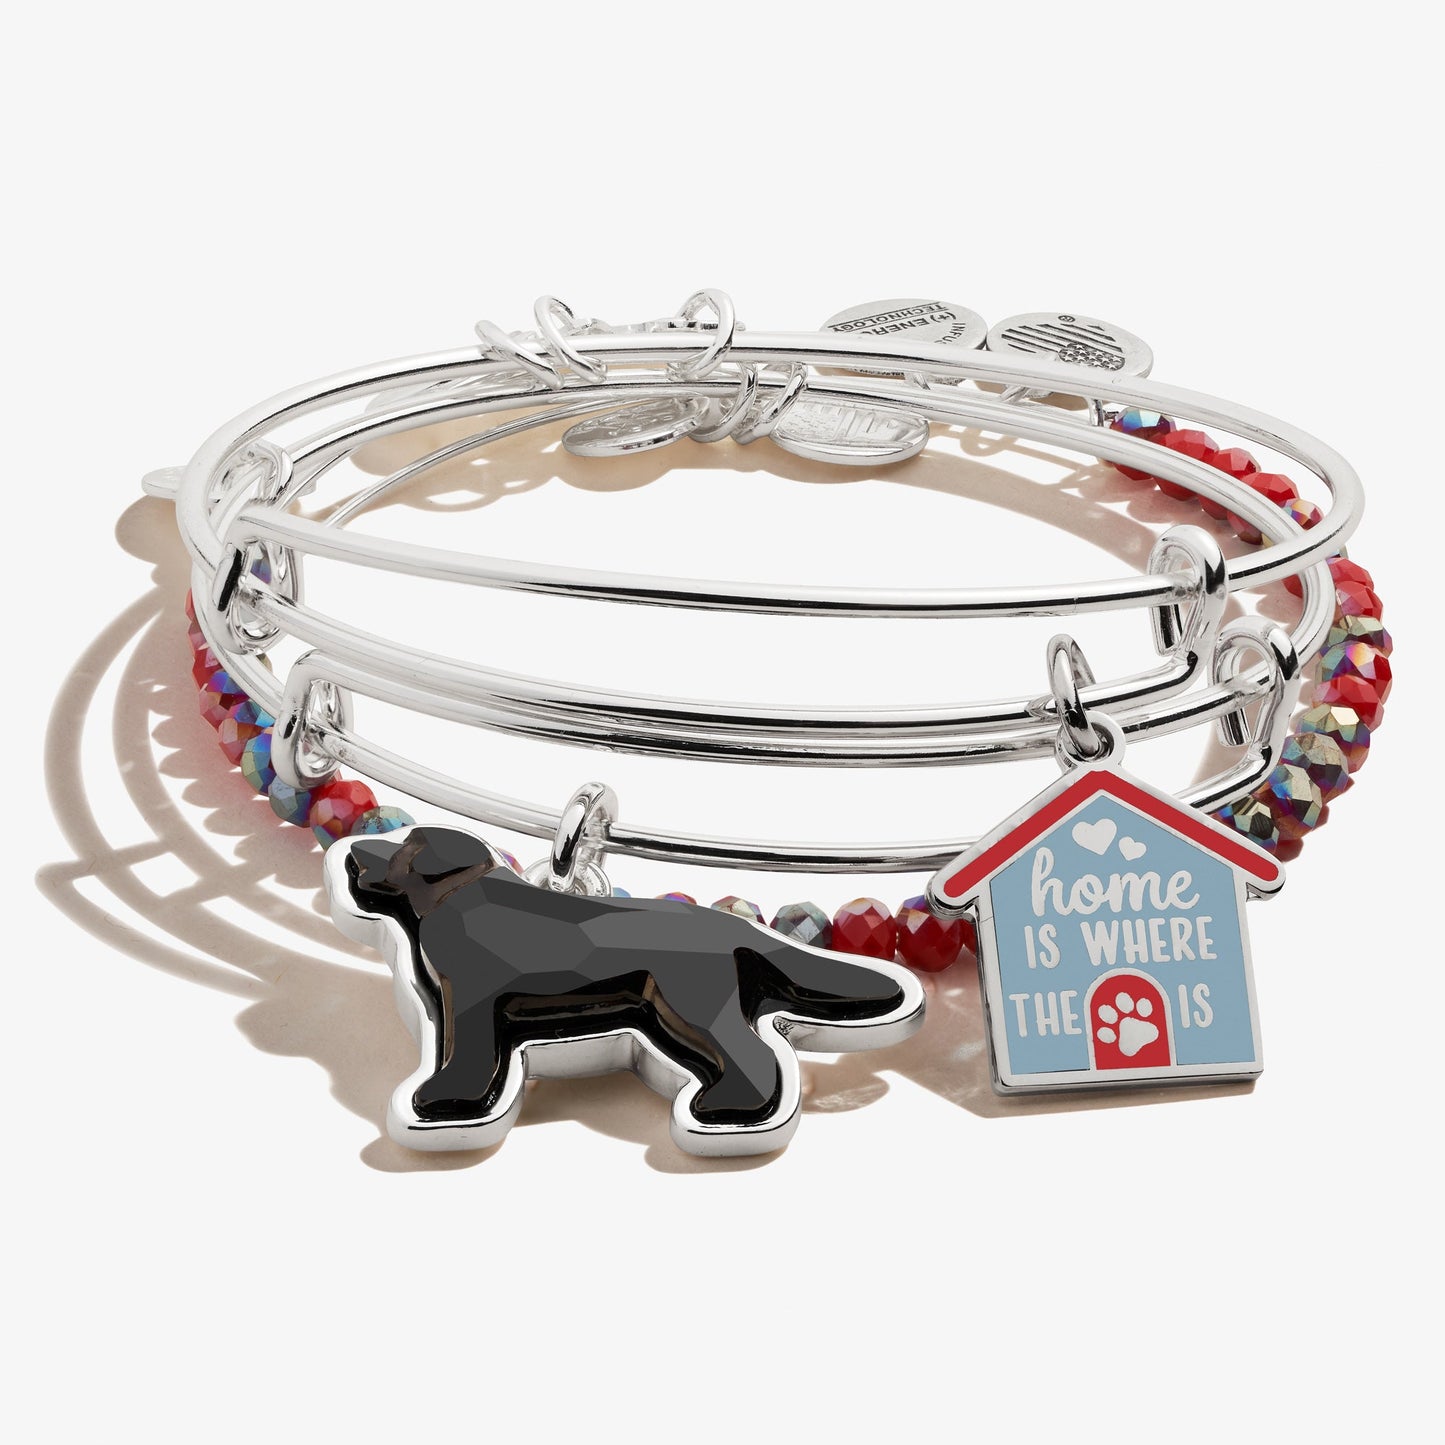 'Home is Where the Paw is' Doghouse Charm Bangles, Set of 3